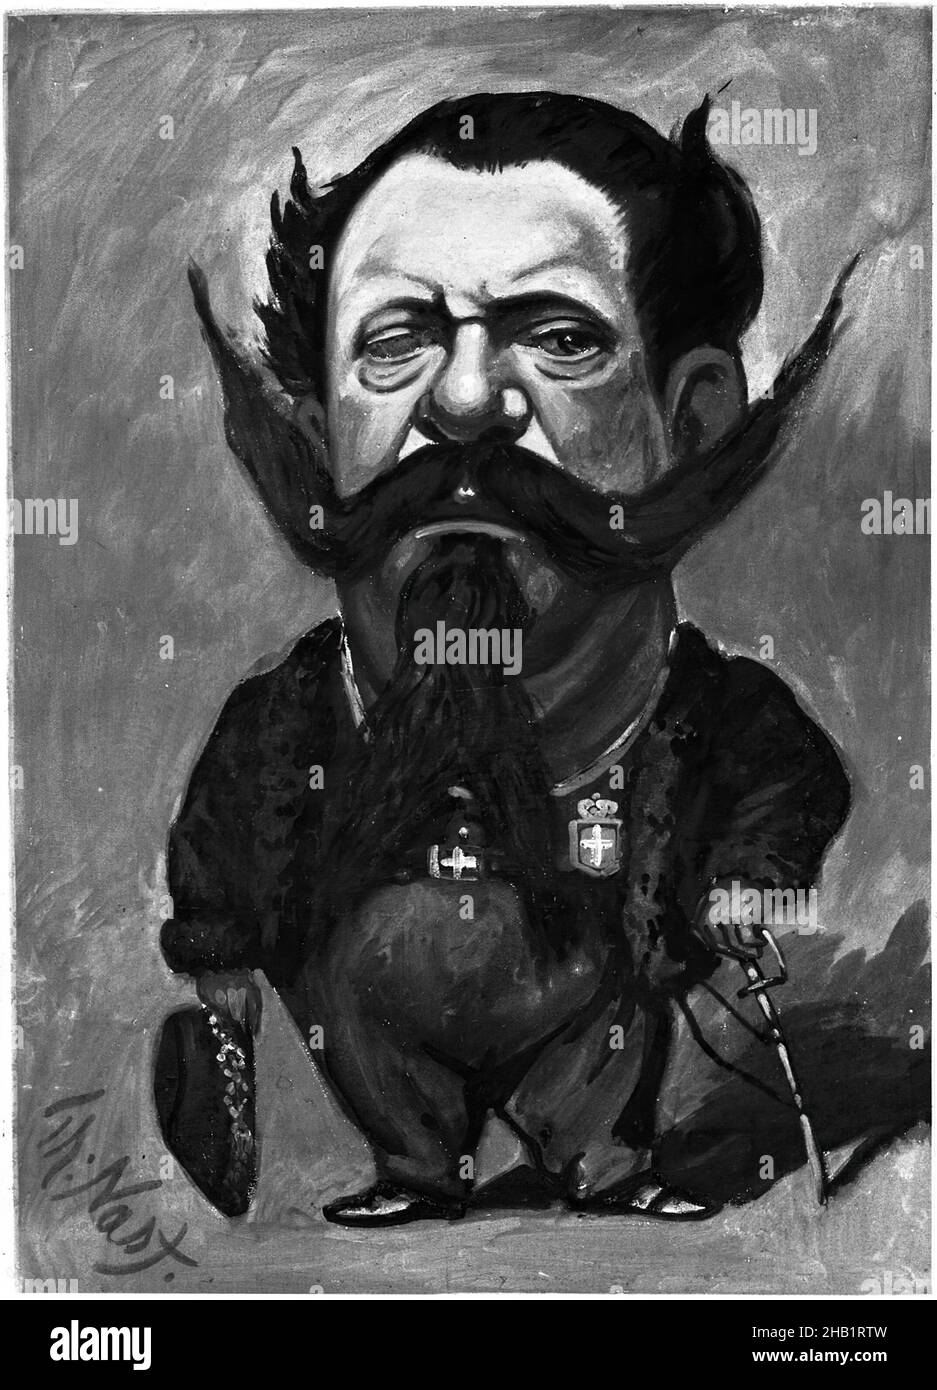 Caricature of King Victor Emmanuel II, Thomas Nast, American, 1840-1902, Oil on canvas, United States, 1866, 47 15/16 x 35 13/16 in., 121.8 x 91 cm, black and white, caricature, facial hair, Italy, King, man, miniature body, moustache, mustache, oil on canvas, painting, surreal, weird Stock Photo